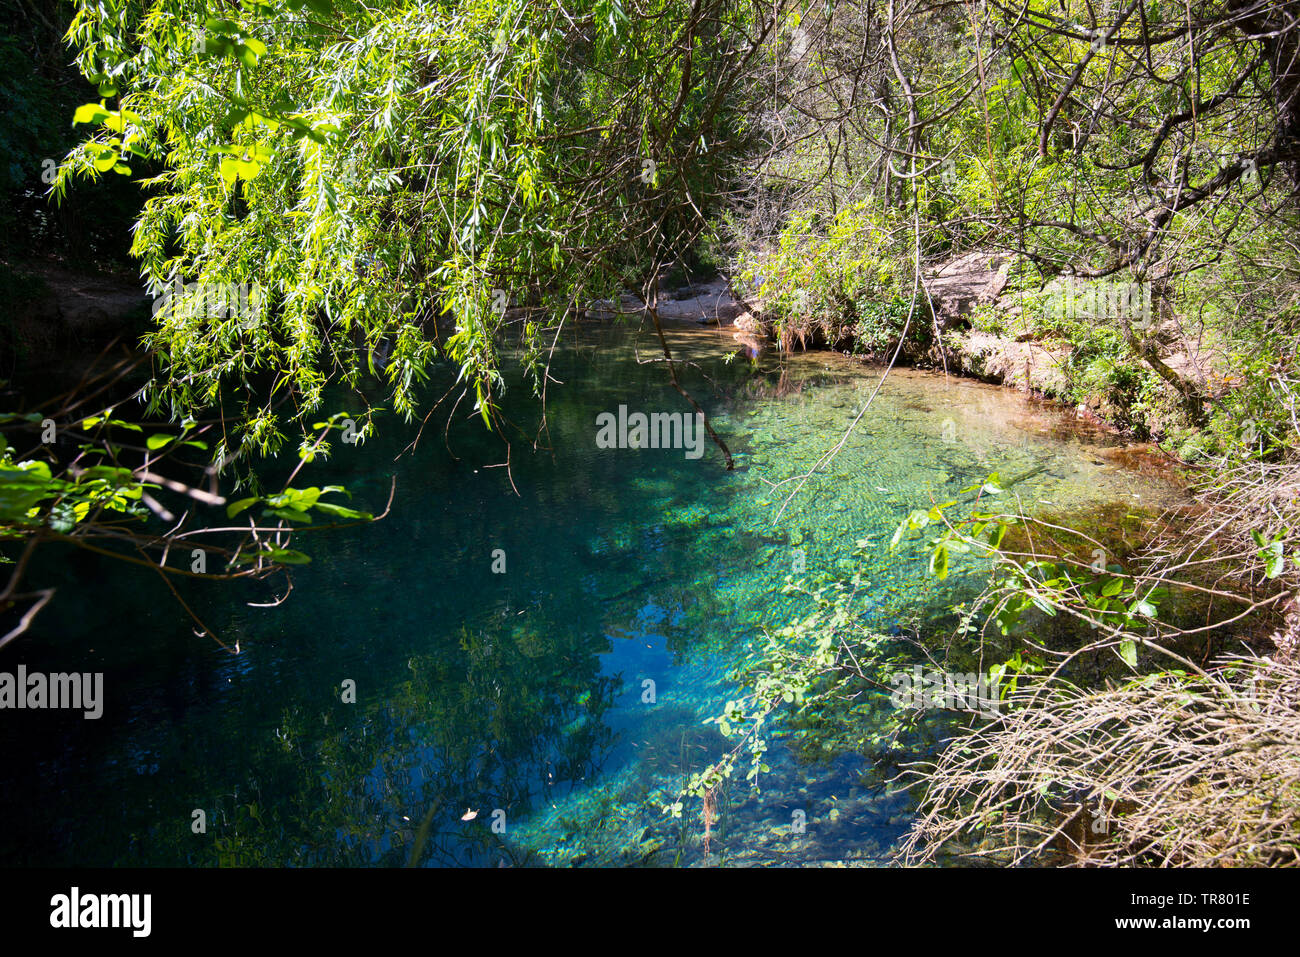 the beautiful spring font vive near grospierres in the ardeche region in france Stock Photo